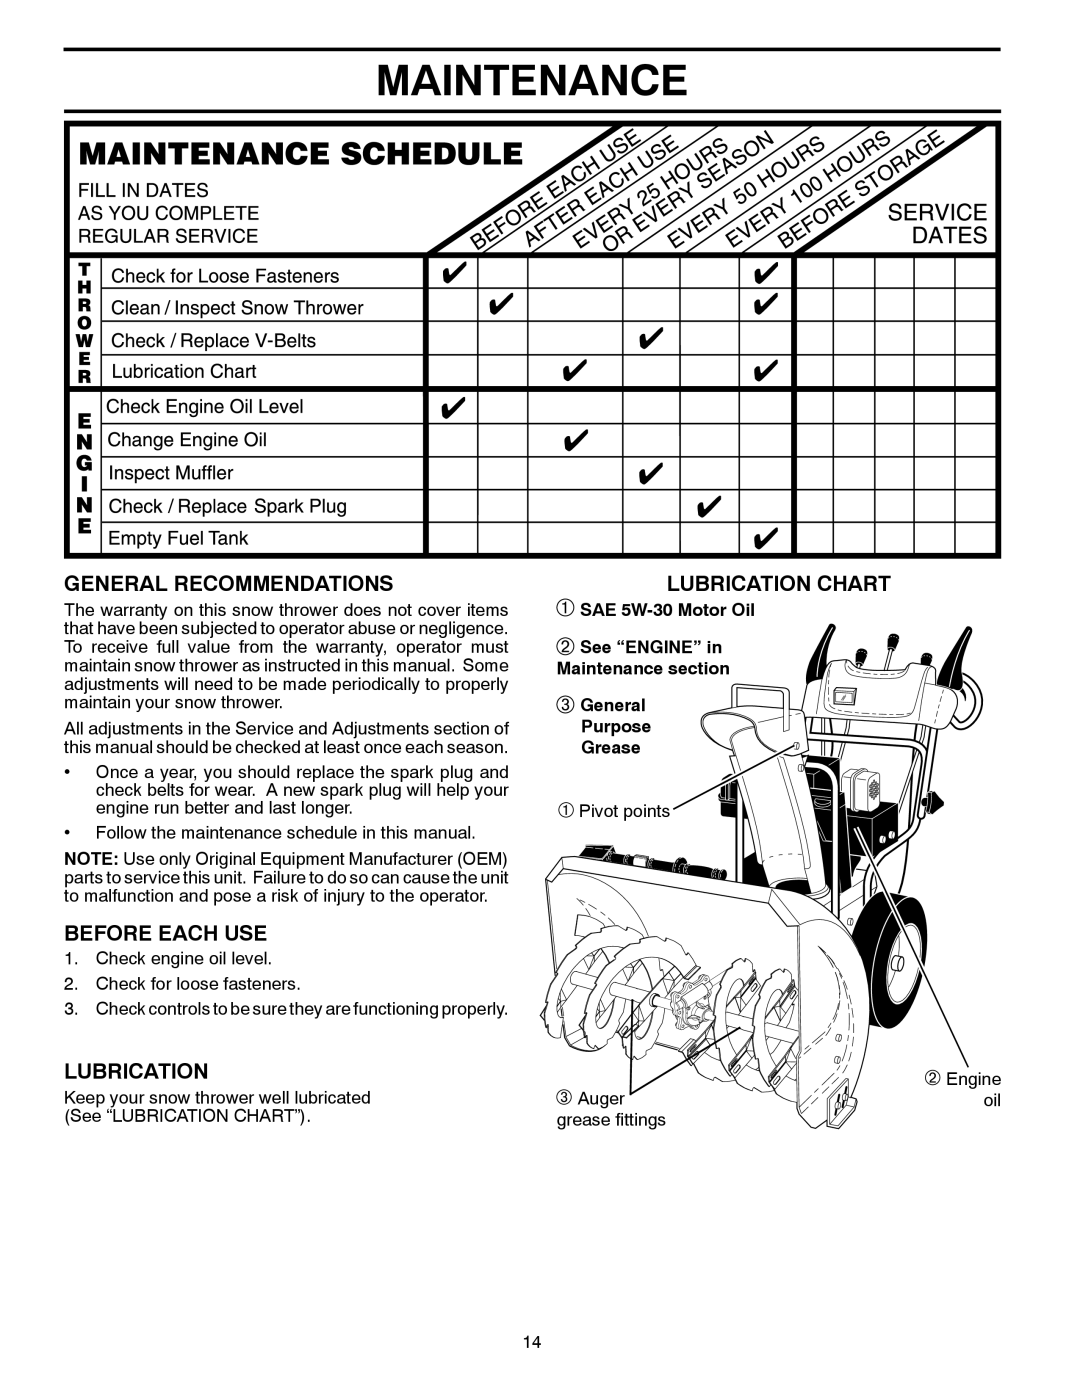 Poulan 429890 owner manual Maintenance, General Recommendations, Before Each Use, Lubrication Chart 